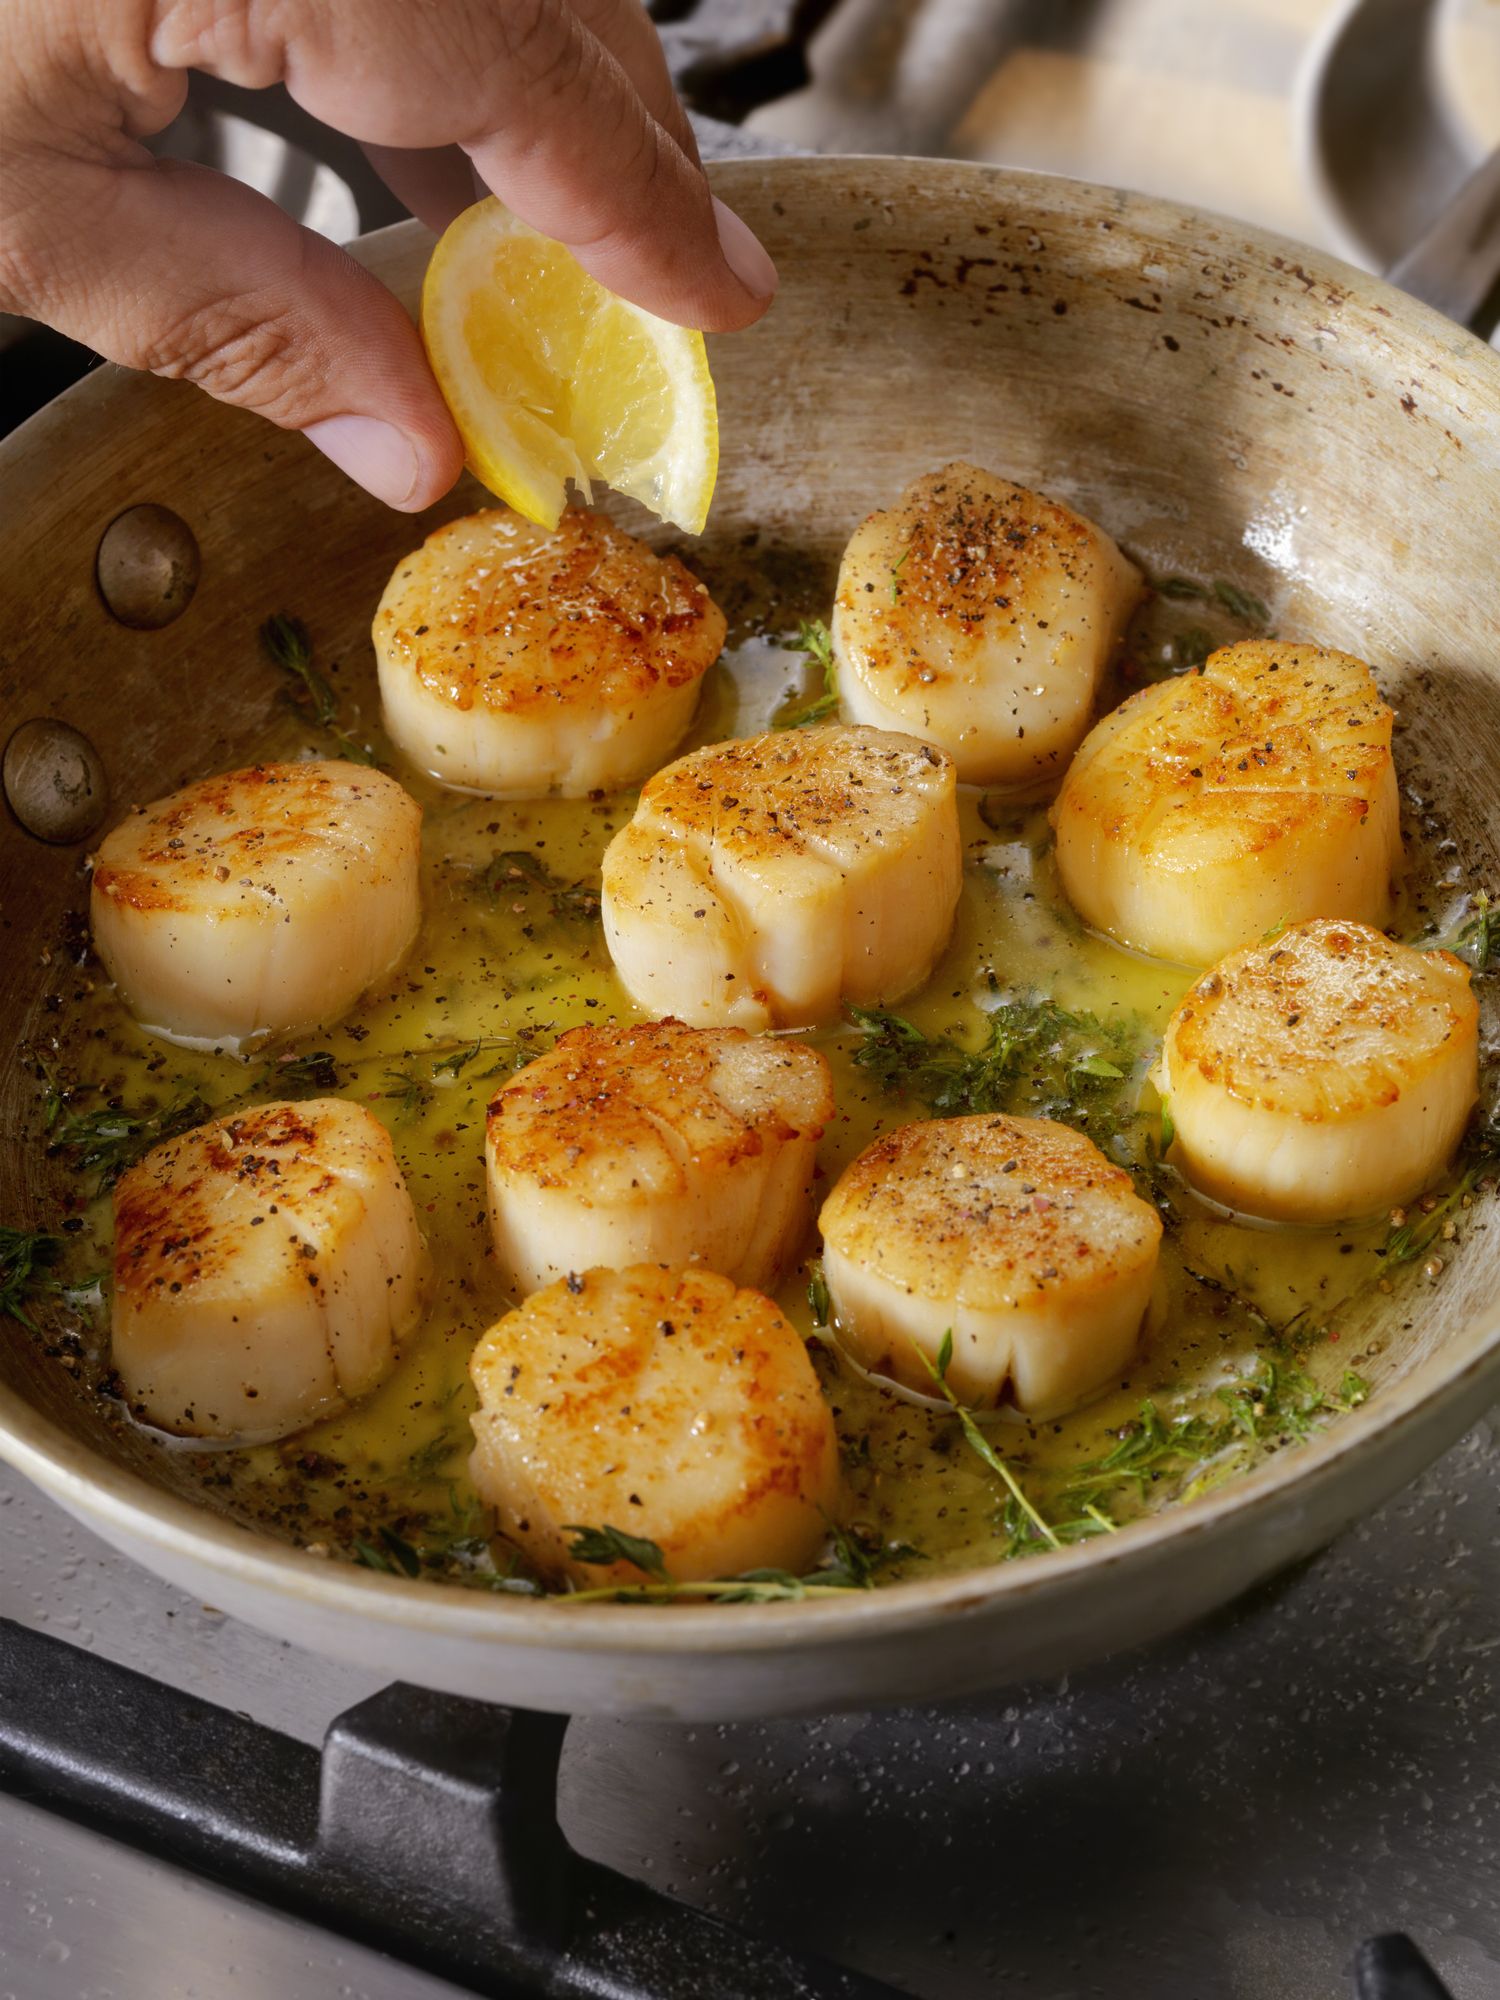 https://hips.hearstapps.com/hmg-prod/images/pan-searing-scallops-in-butter-royalty-free-image-1641398070.jpg